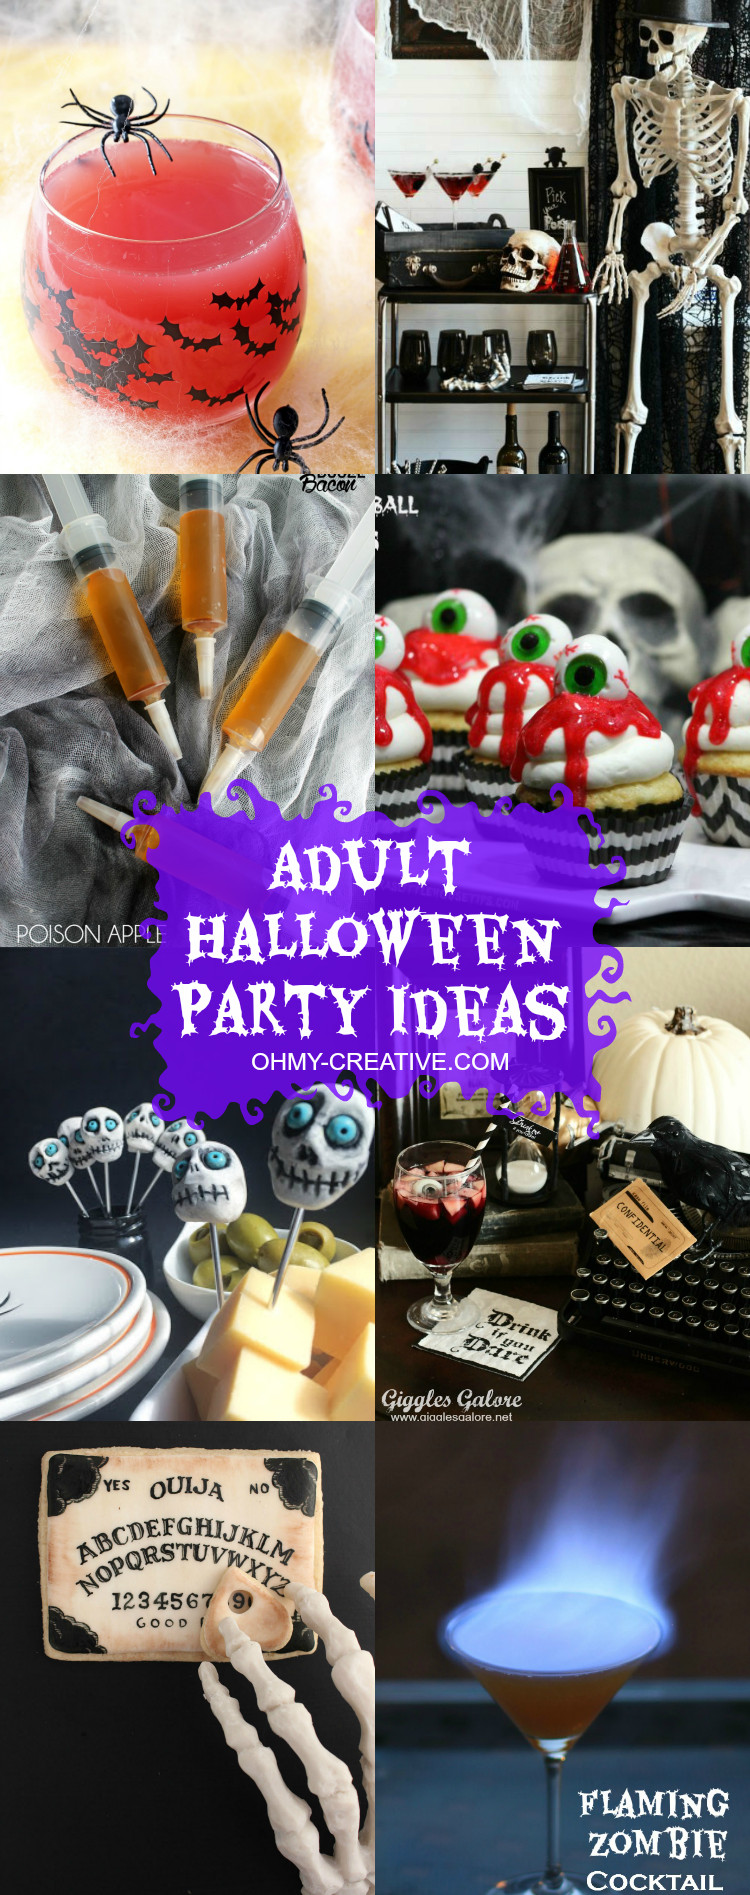 Halloween Costume Birthday Party Ideas
 Adult Halloween Party Ideas Page 2 of 29 Oh My Creative